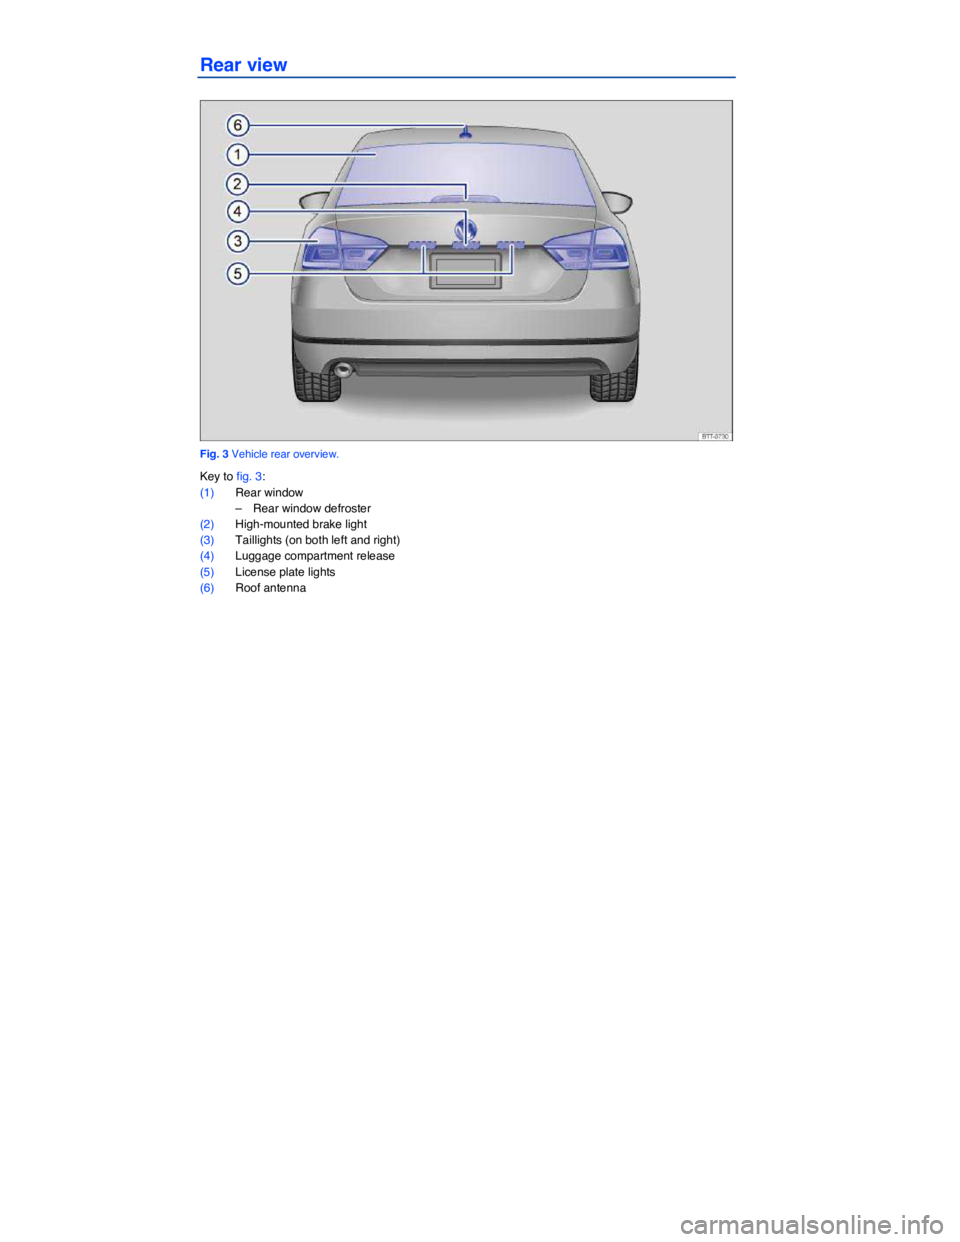 VOLKSWAGEN PASSAT 2009  Owners Manual  
Rear view 
 
Fig. 3 Vehicle rear overview. 
Key to fig. 3: 
(1) Rear window 
–  Rear window defroster  
(2) High-mounted brake light 
(3) Taillights (on both left and right)  
(4) Luggage compartm